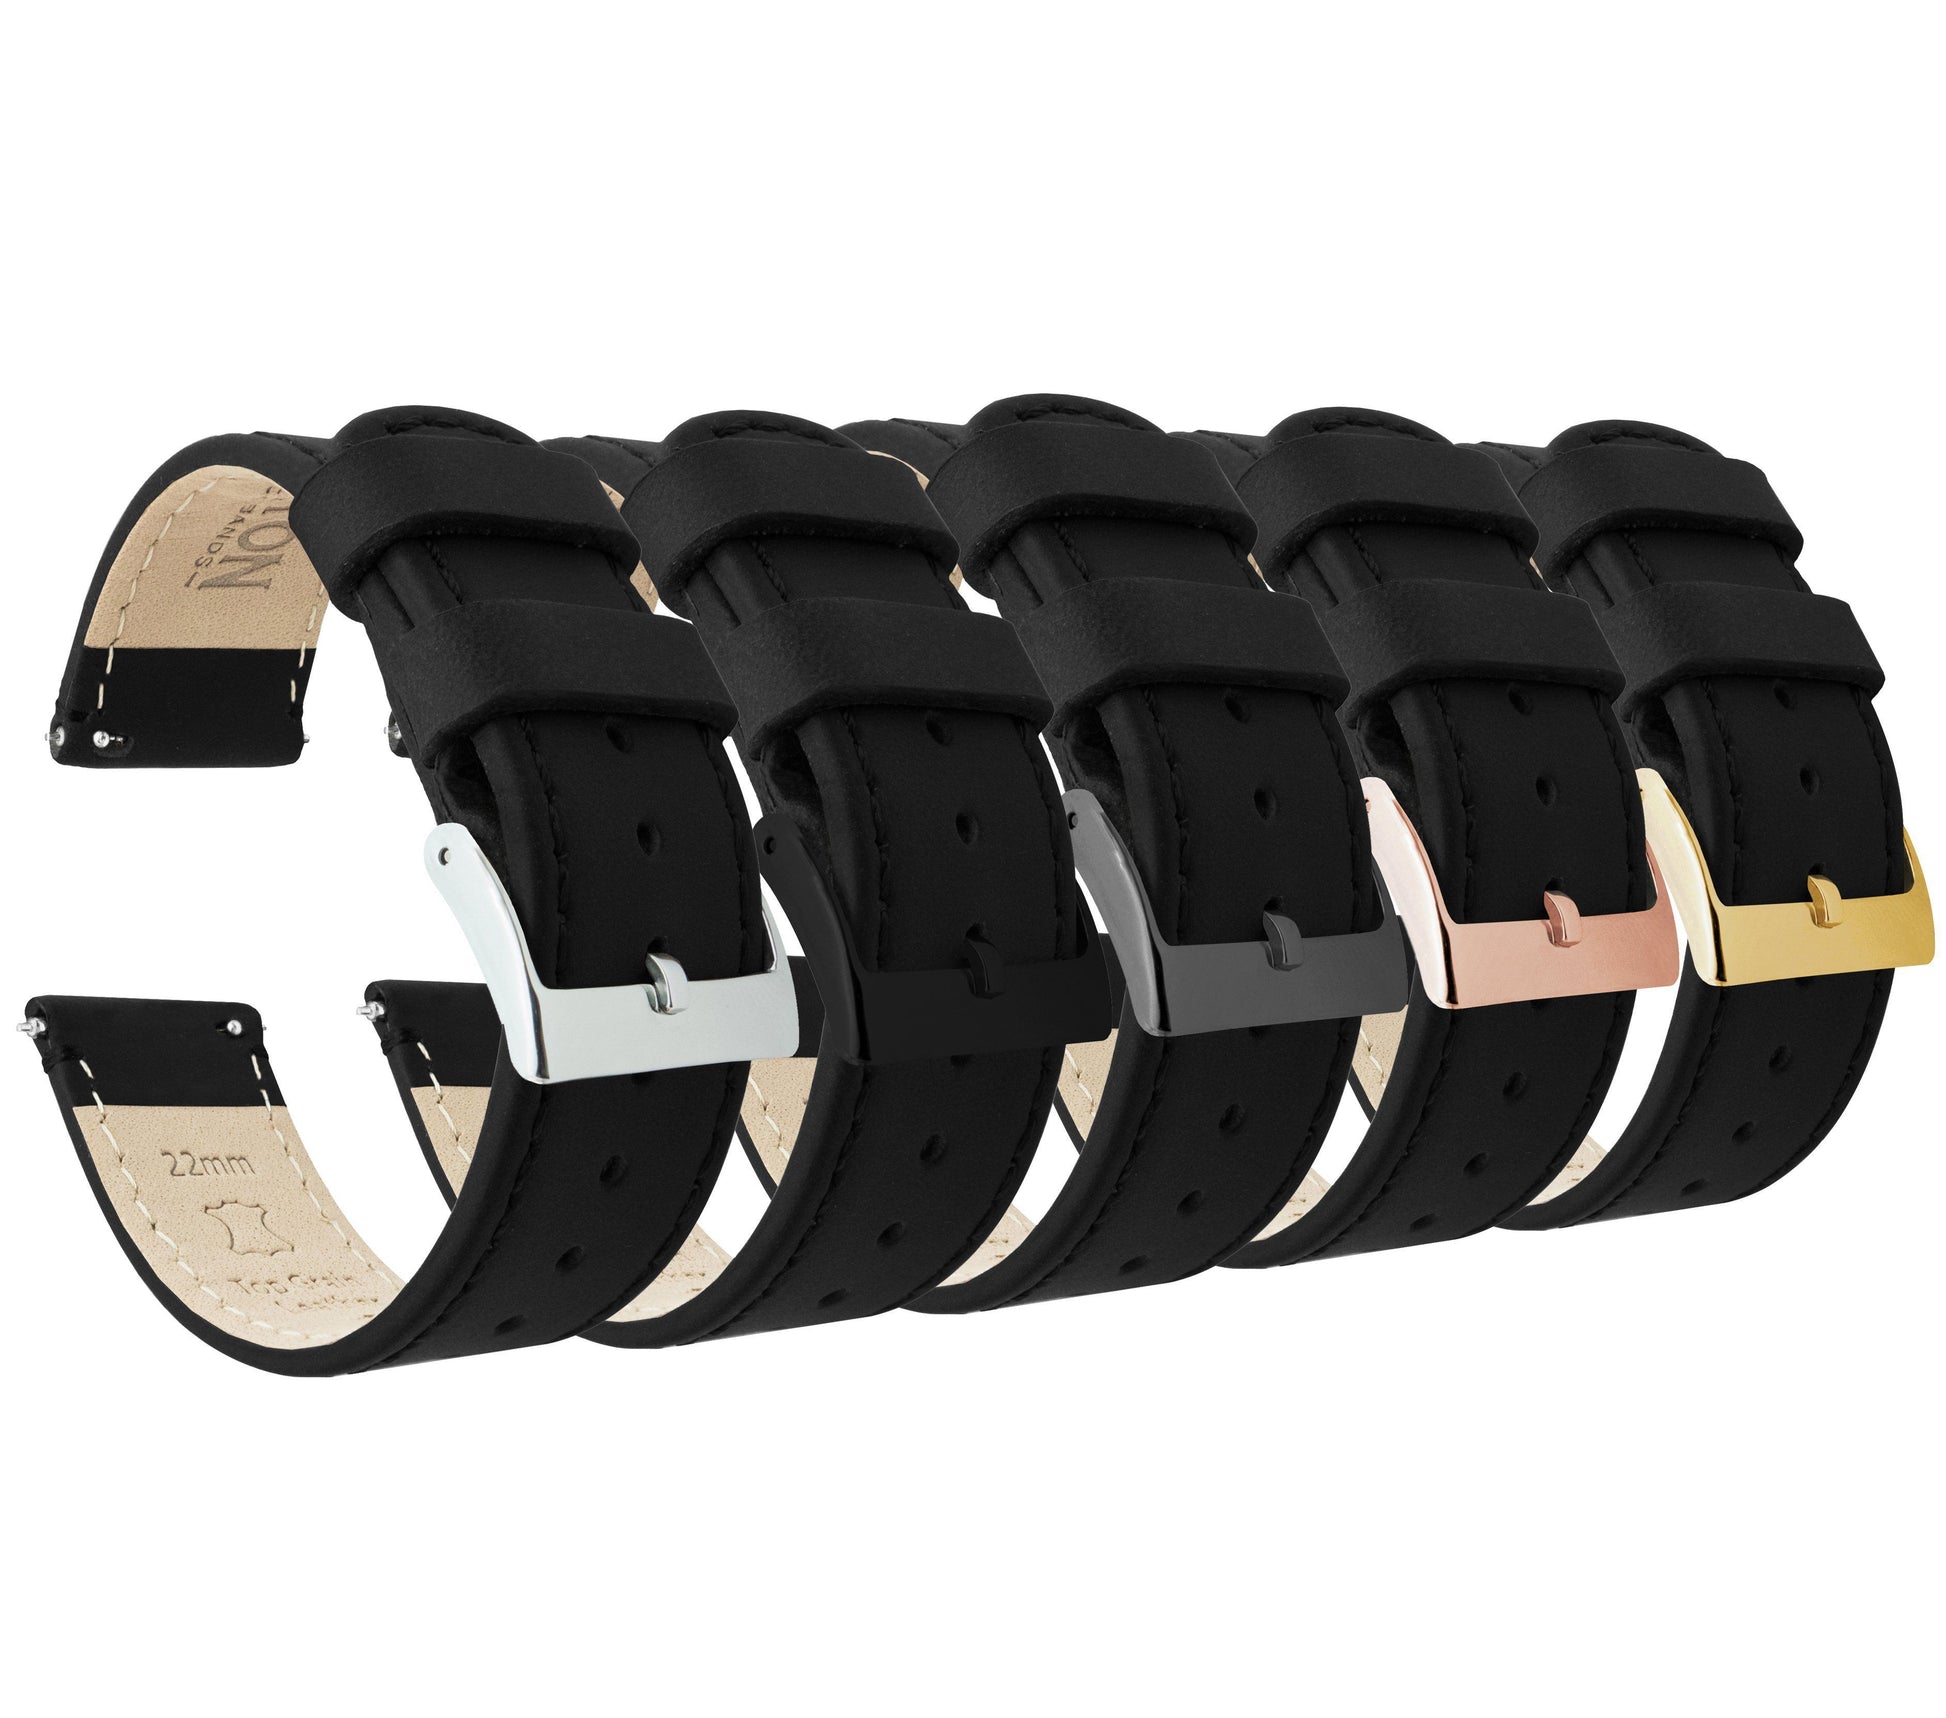  BARTON Elite Silicone Watch Bands - Quick Release - Choose  Strap Color & Buckle Color (Stainless Steel, Black PVD or Gunmetal Grey) 